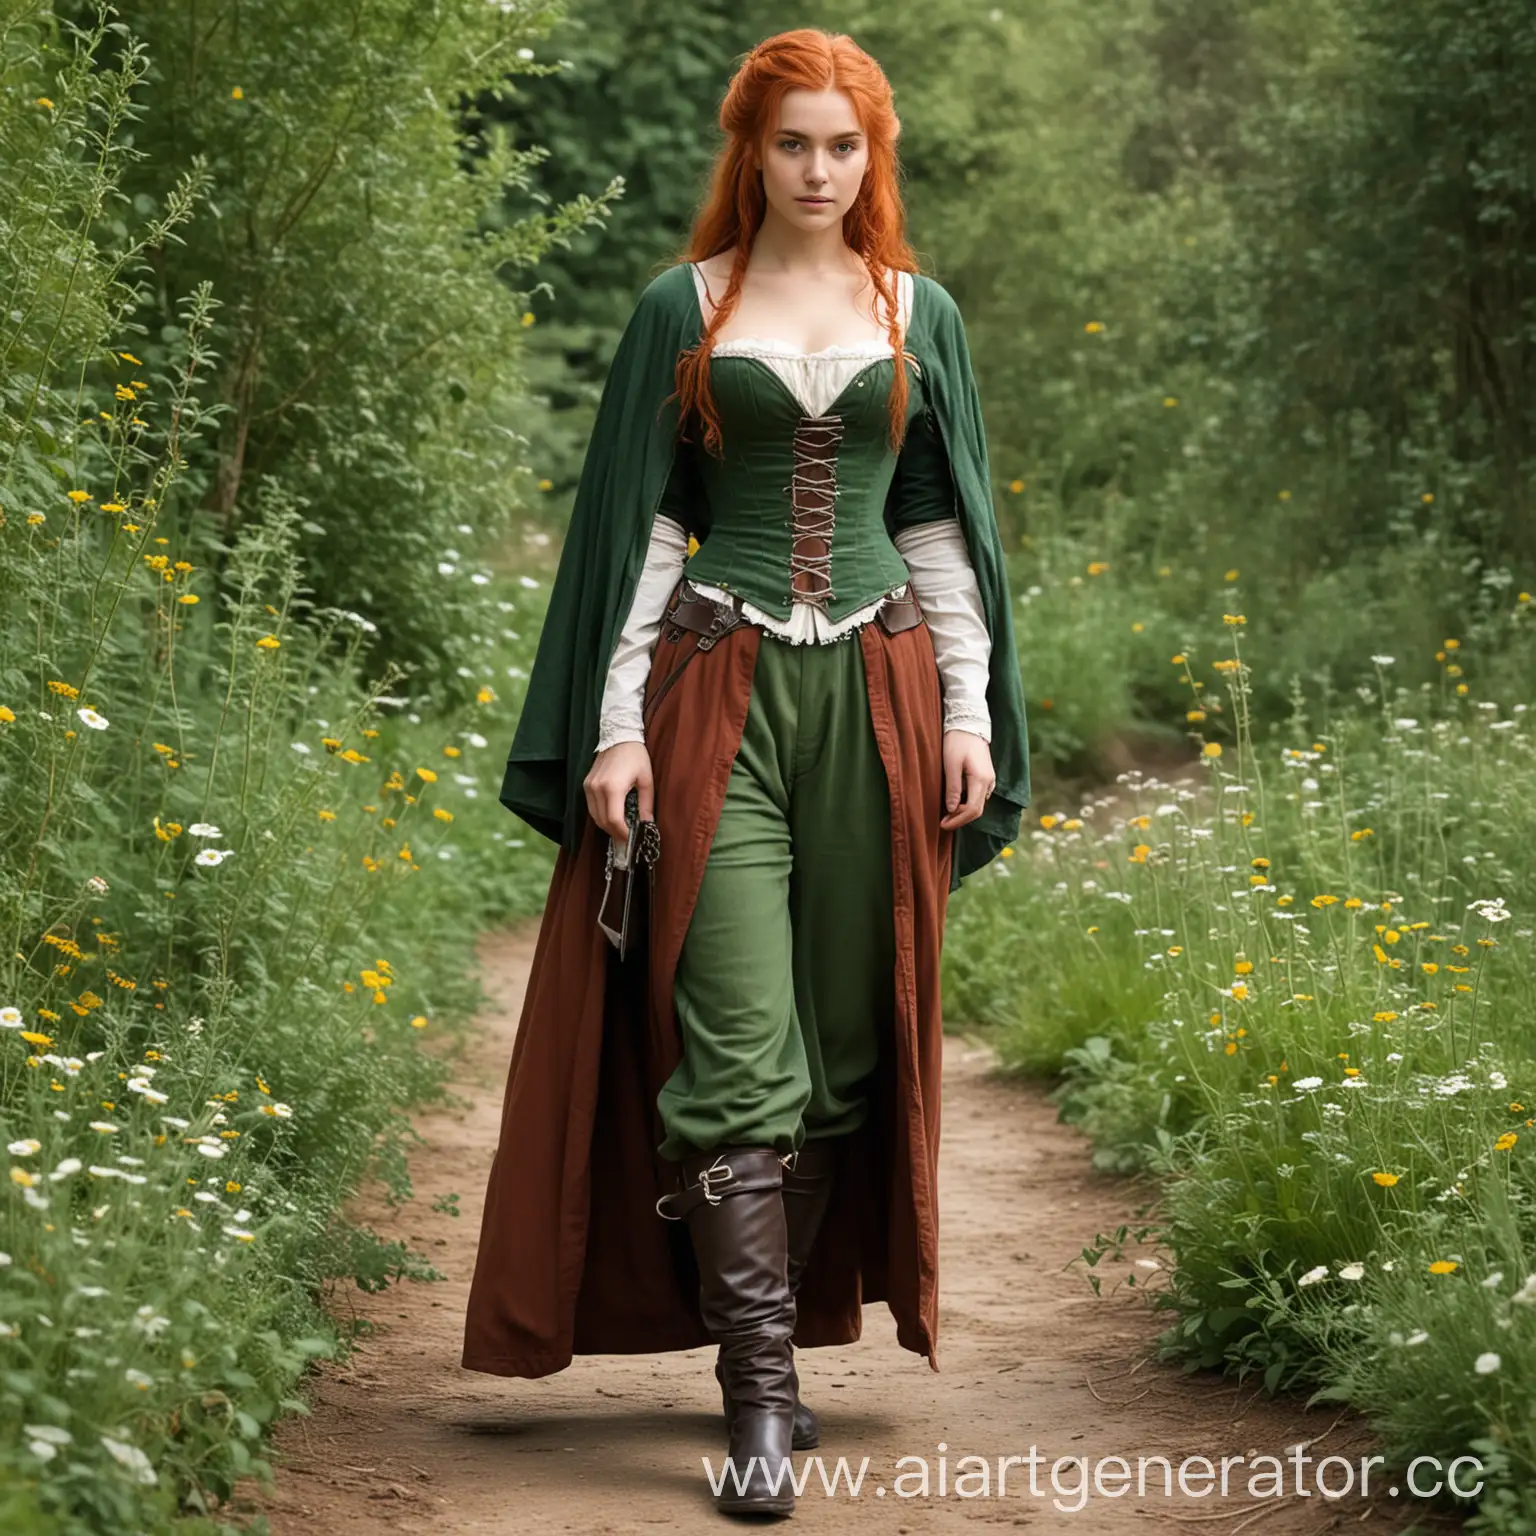 Medieval-Herbalist-Girl-with-Red-and-White-Hair-in-Trousers-and-Green-Corset